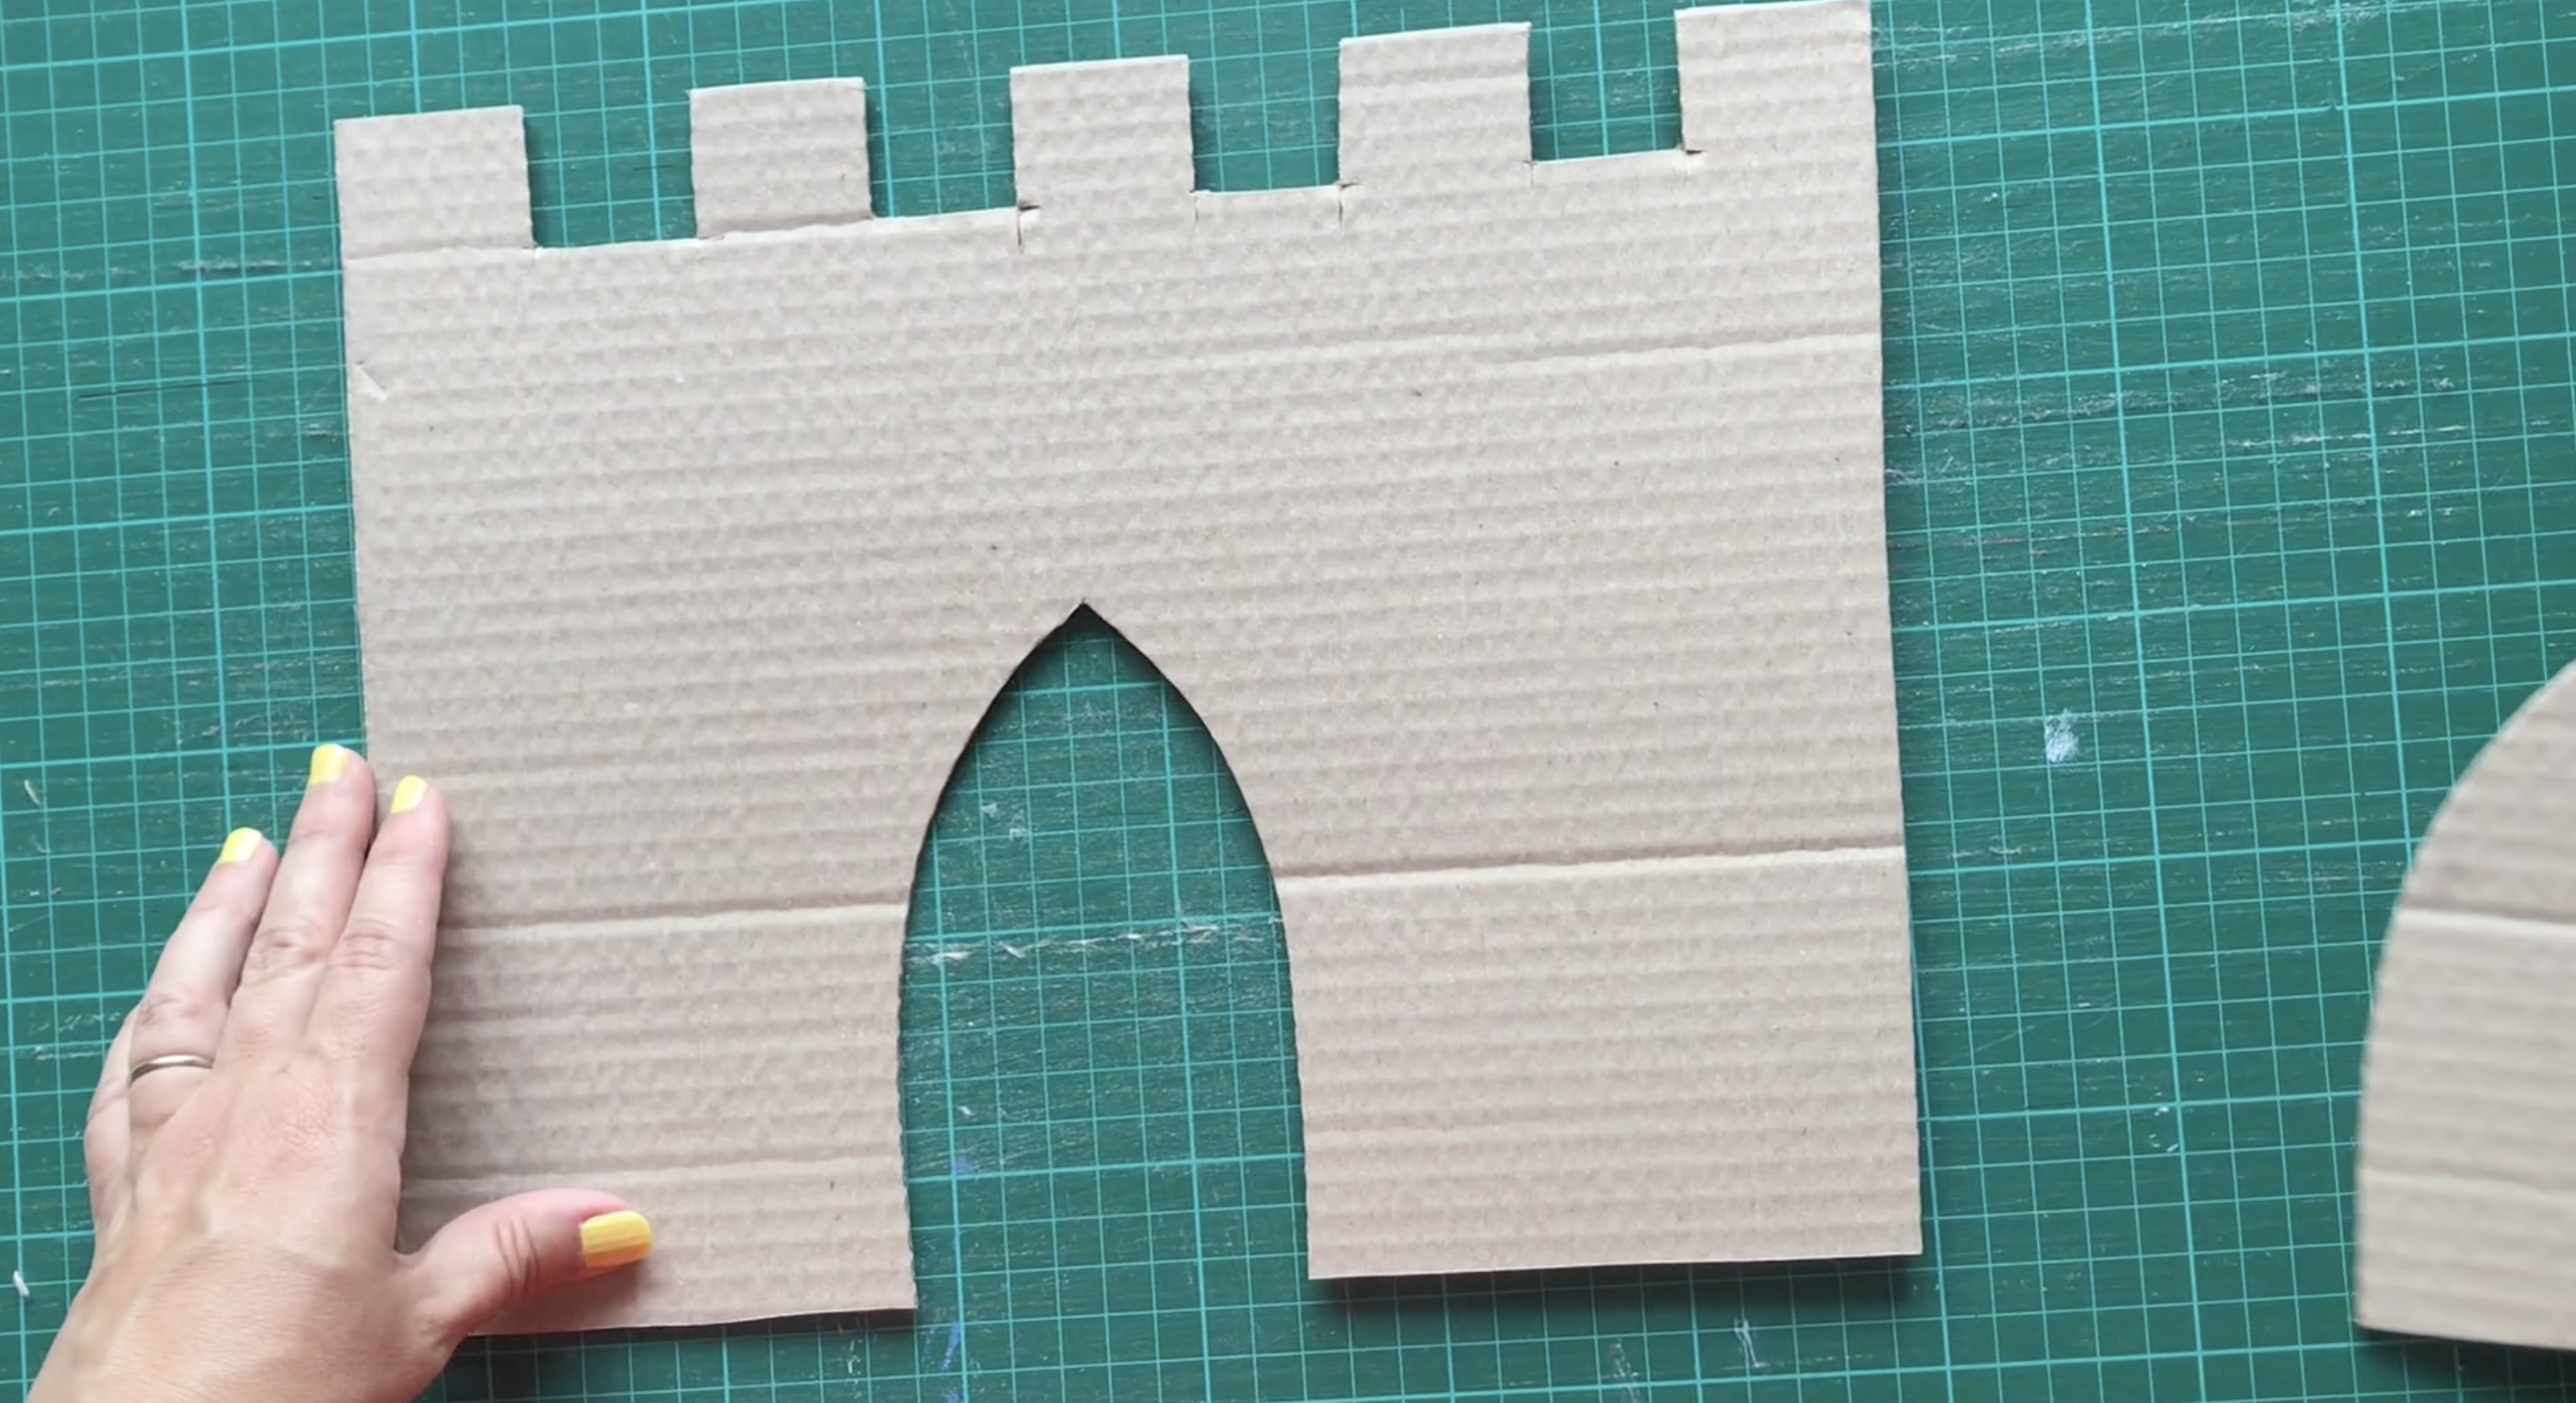 Cut a door shape from the bottom edge of the castle wall